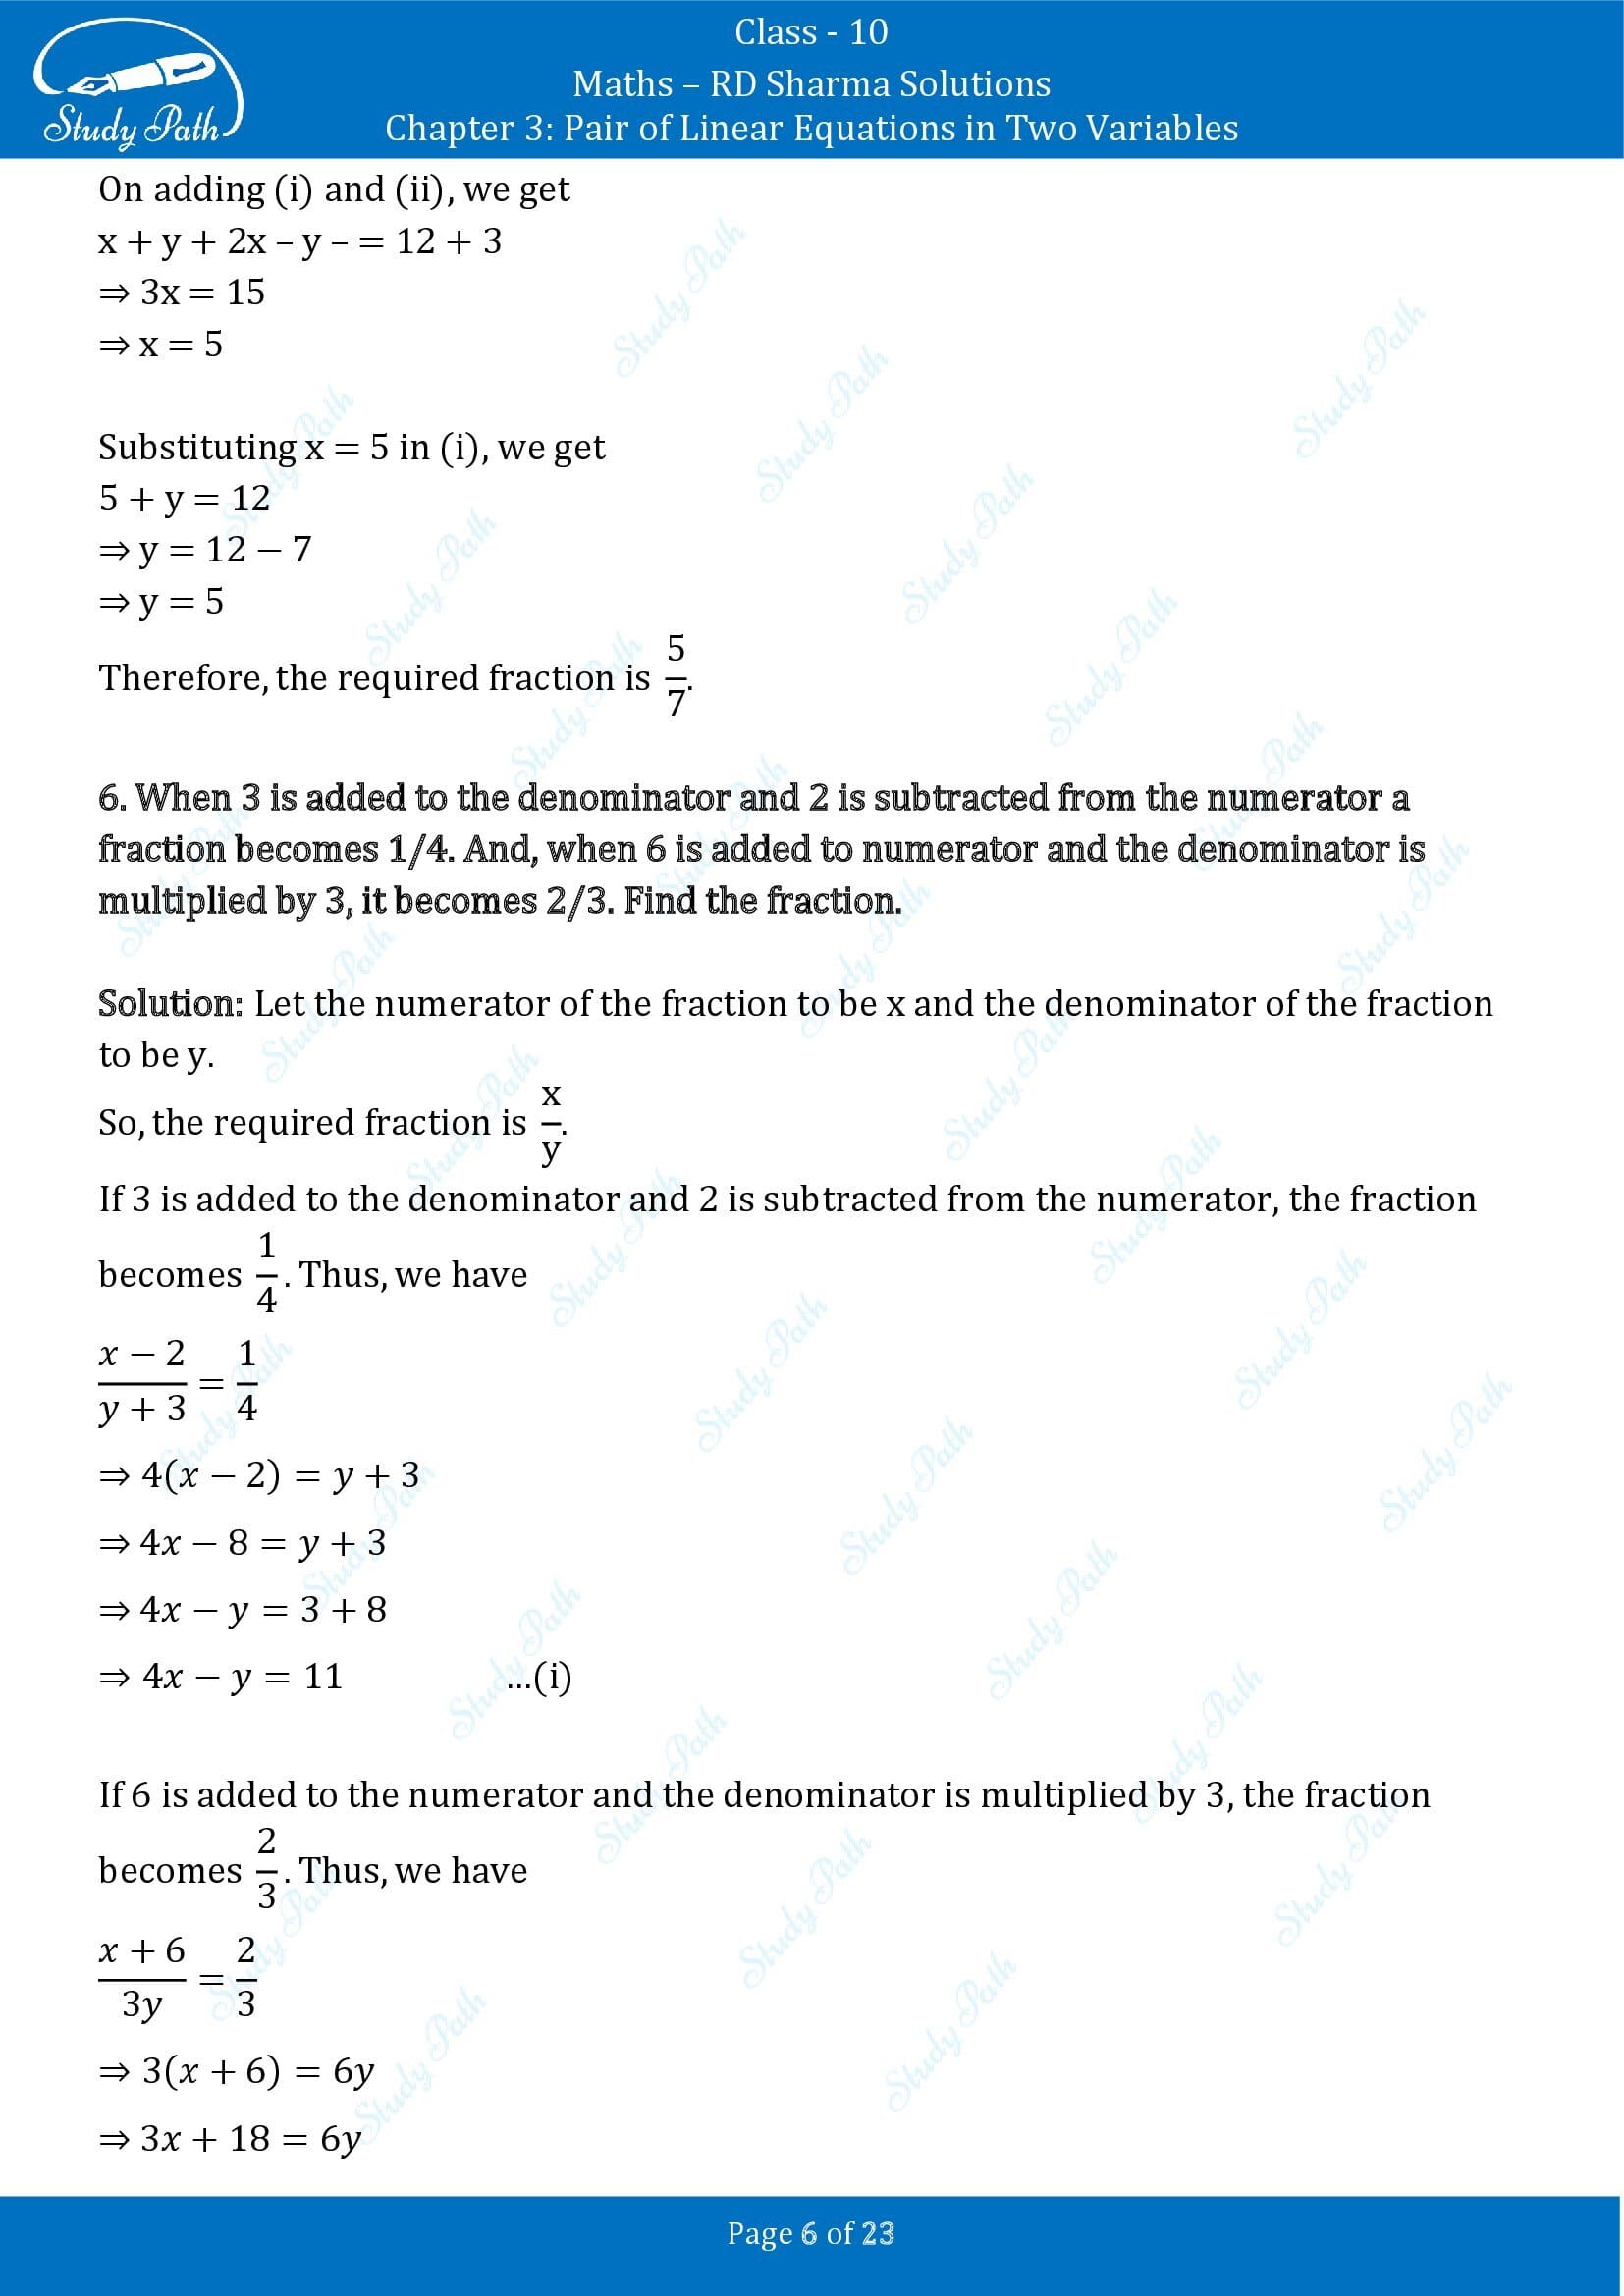 RD Sharma Solutions Class 10 Chapter 3 Pair of Linear Equations in Two Variables Exercise 3.8 00006